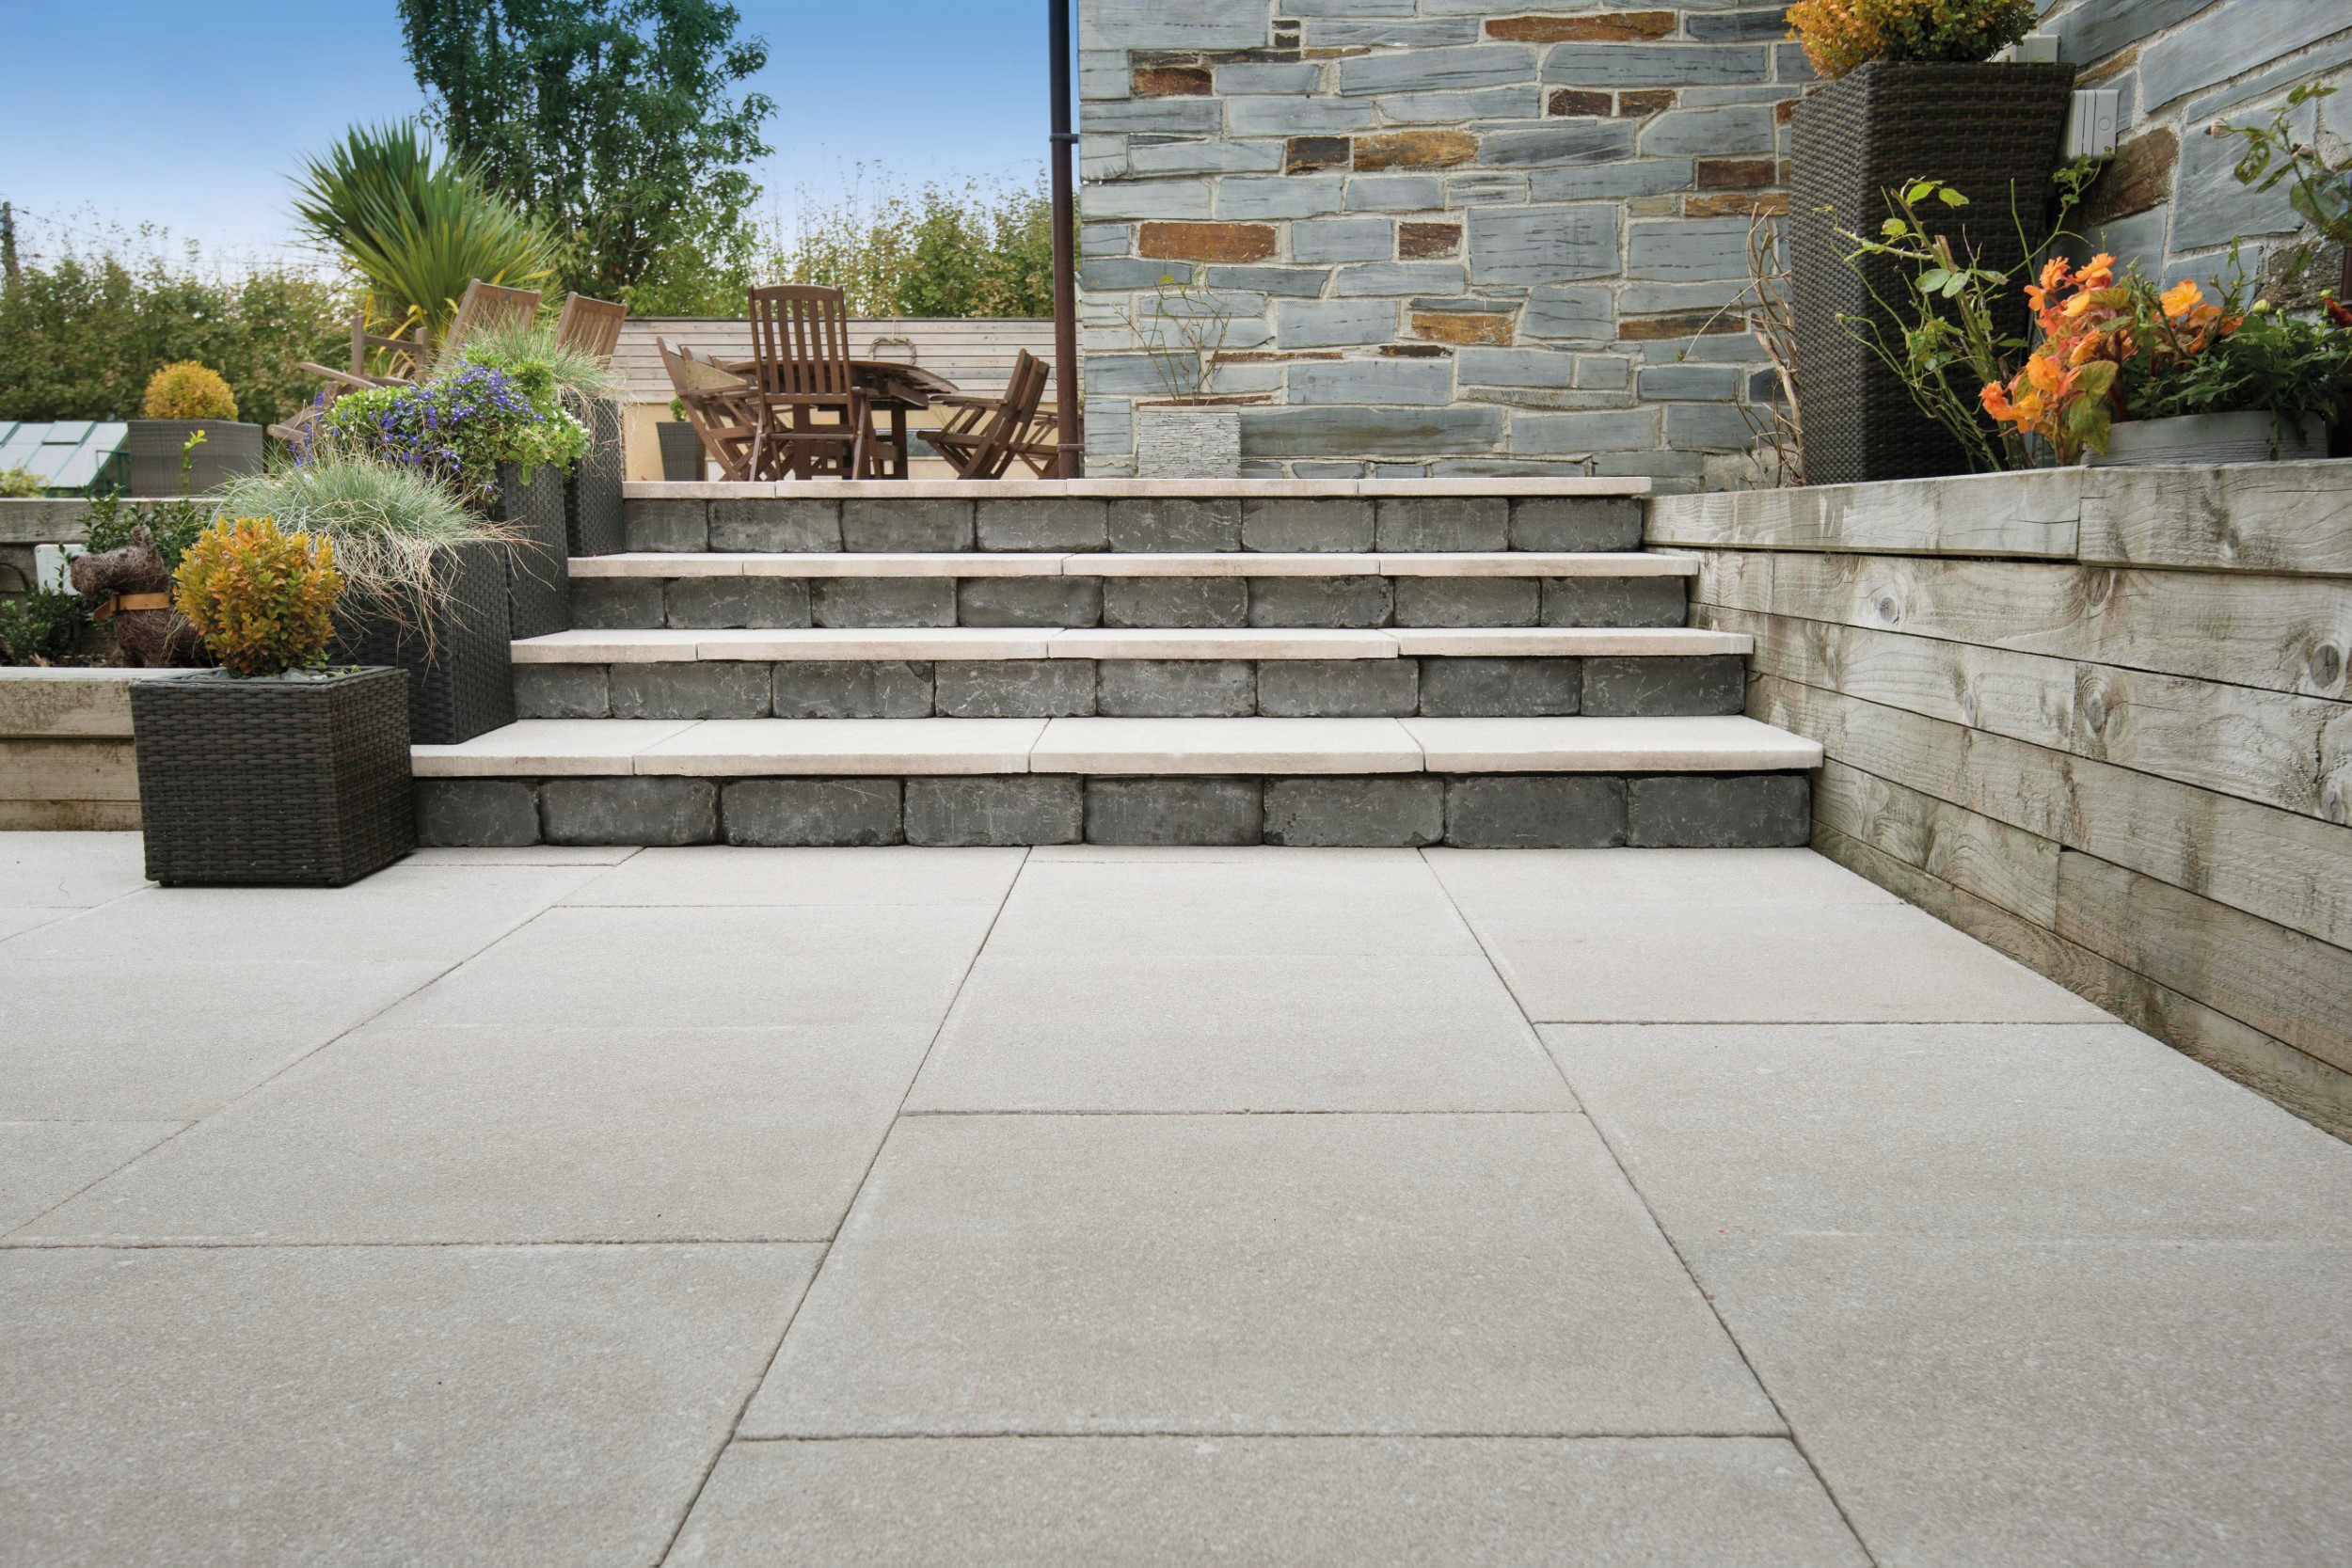 Chaucer Natural | 600 x 6000 paving slabs | cheap paving slabs | garden patio slabs | garden pavers | garden paving | garden paving slabs | garden slab | Grey Patio Slabs | grey paving slabs | patio pavers | patio slabs | patio slabs near me | paver stones | pavers for the garden | Slabs for patio